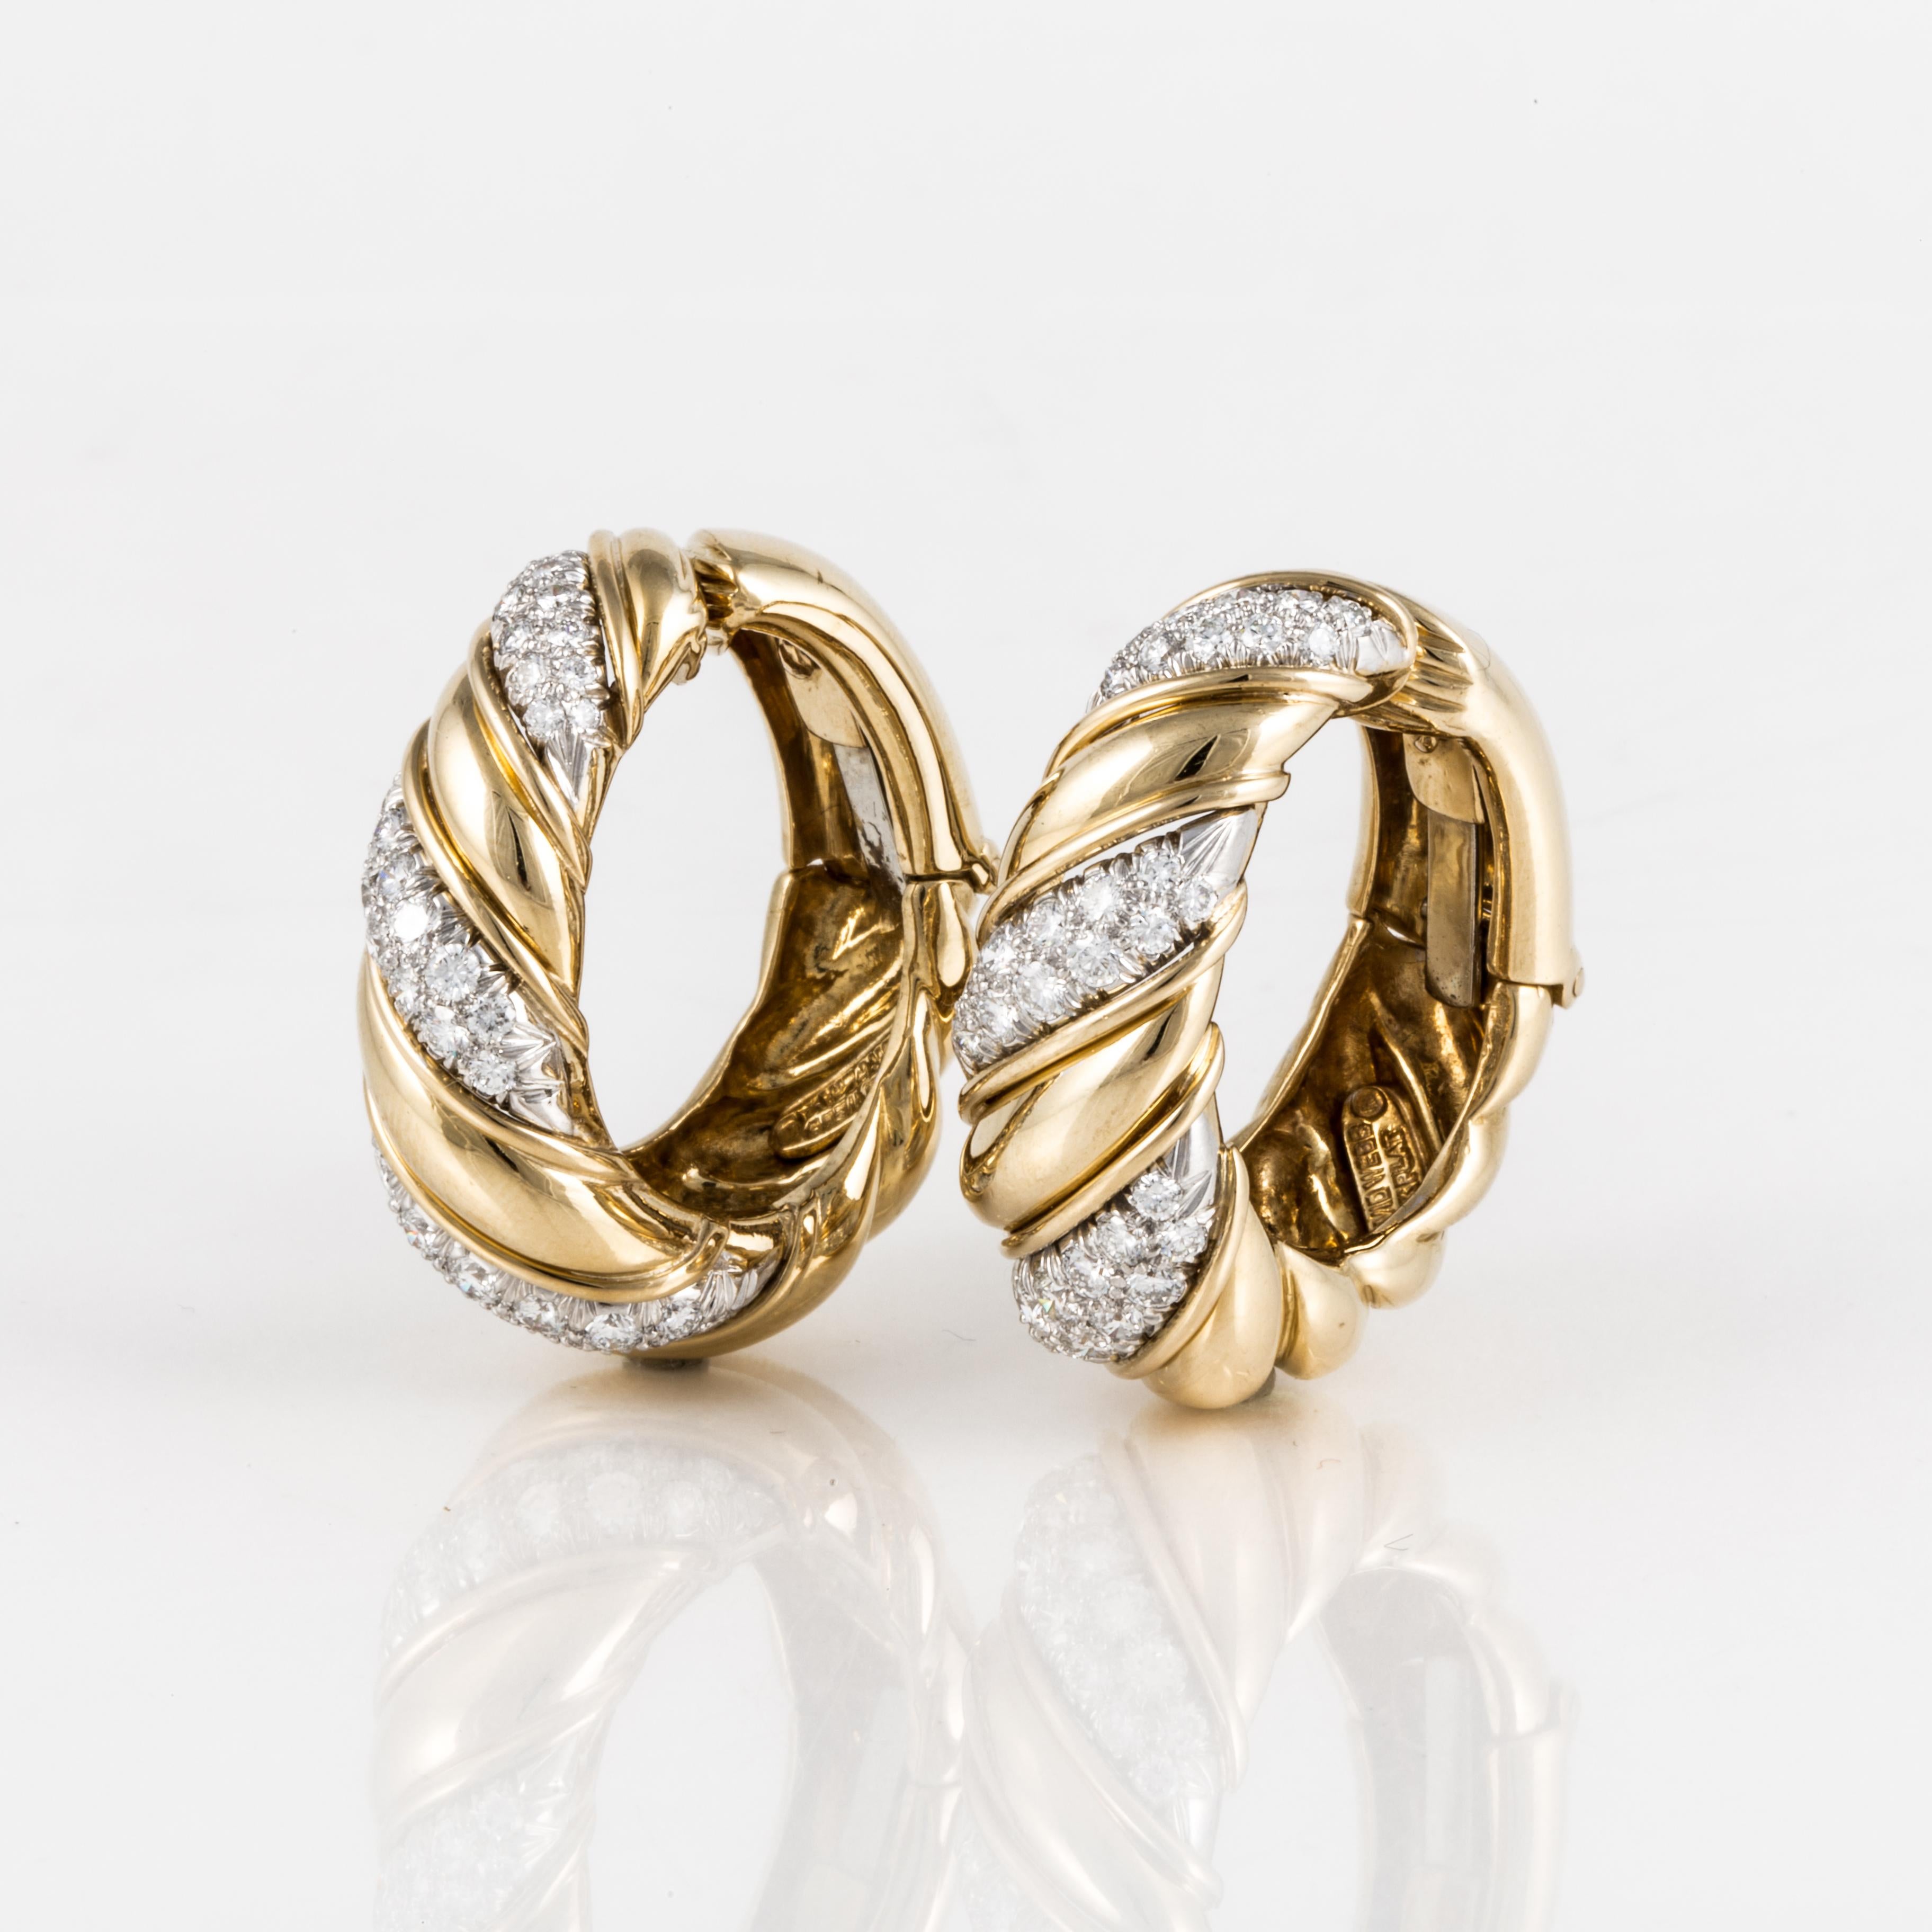 David Webb hoop earrings in 18K yellow gold and platinum with diamonds.  There are seventy-four (74) round diamonds that cross the earrings diagonally.  They total 3.10 carats; G-H color and VVS-VS clarity.  Measure 1 1/4 inches long and 1/2 inches